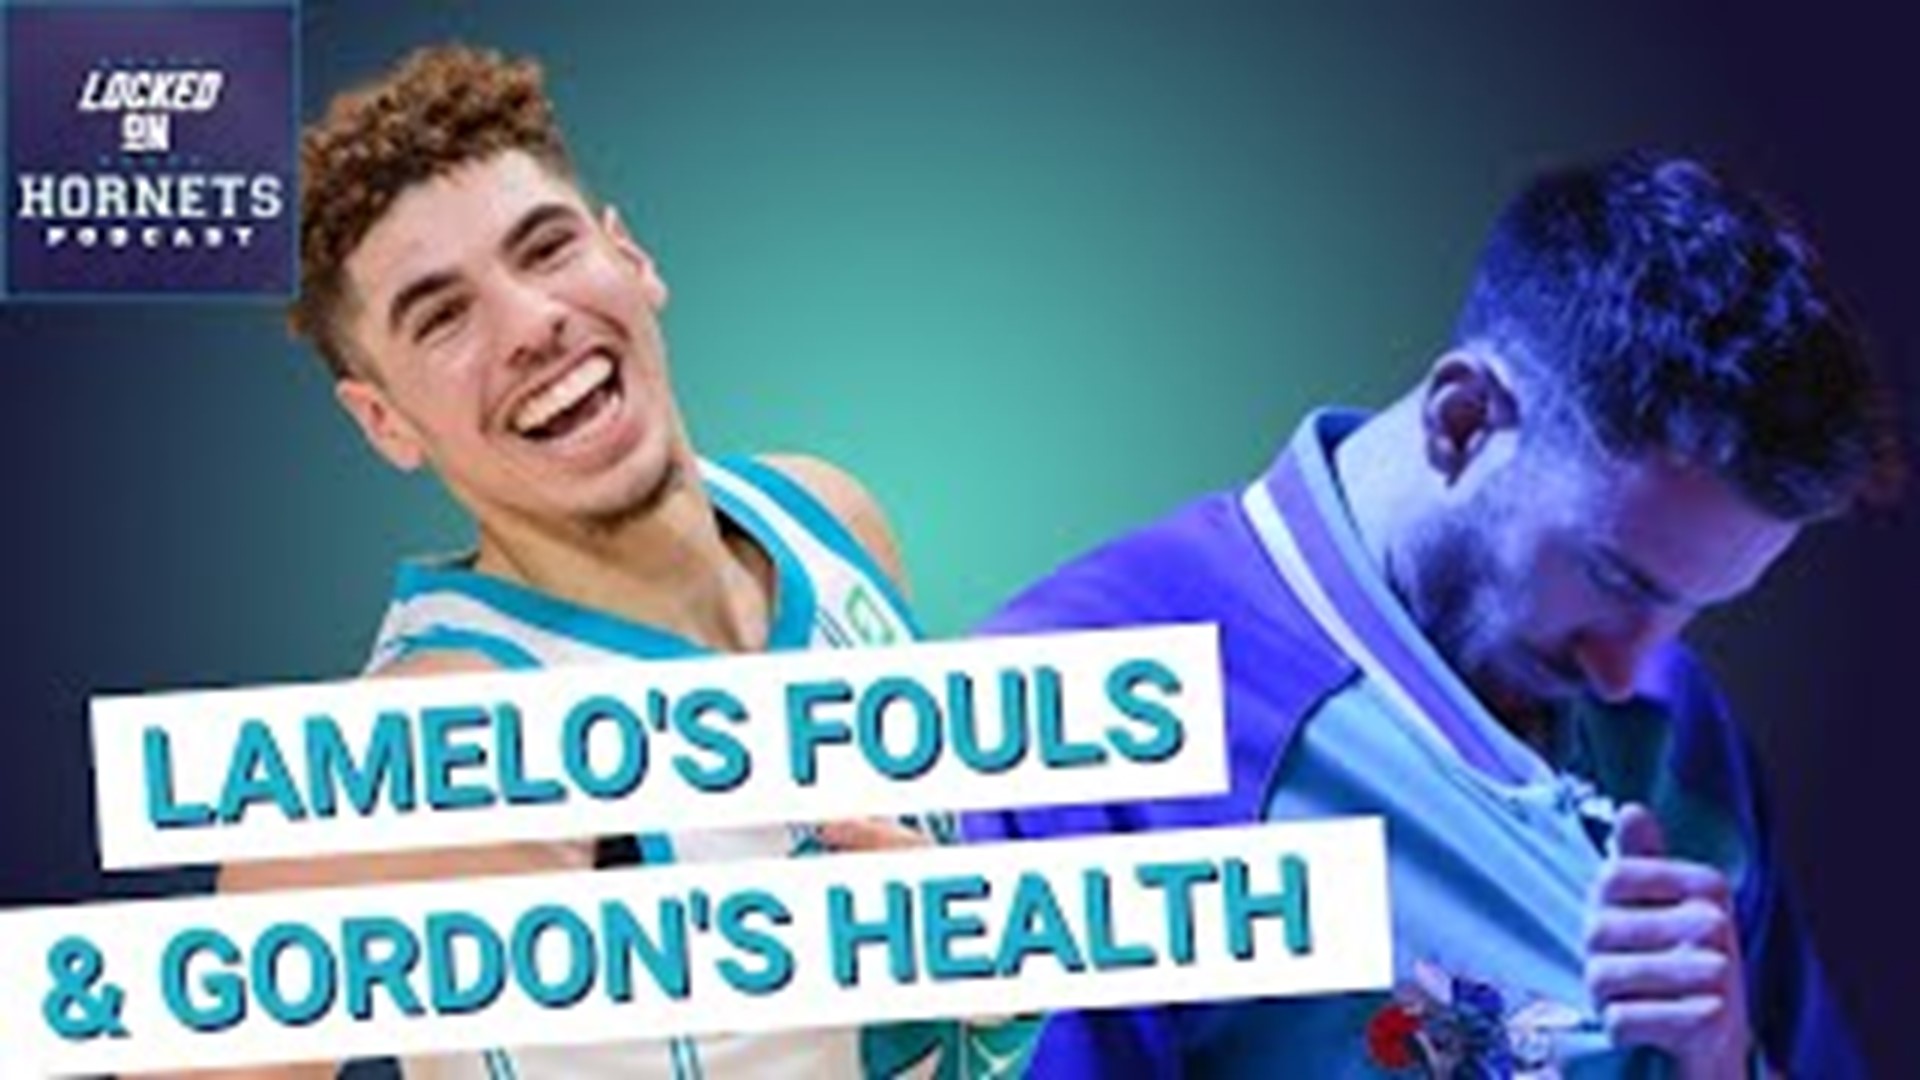 Is there something Steve Clifford thinks LaMelo Ball can tweak to take his game to the next level? That and more on Locked On Hornets!